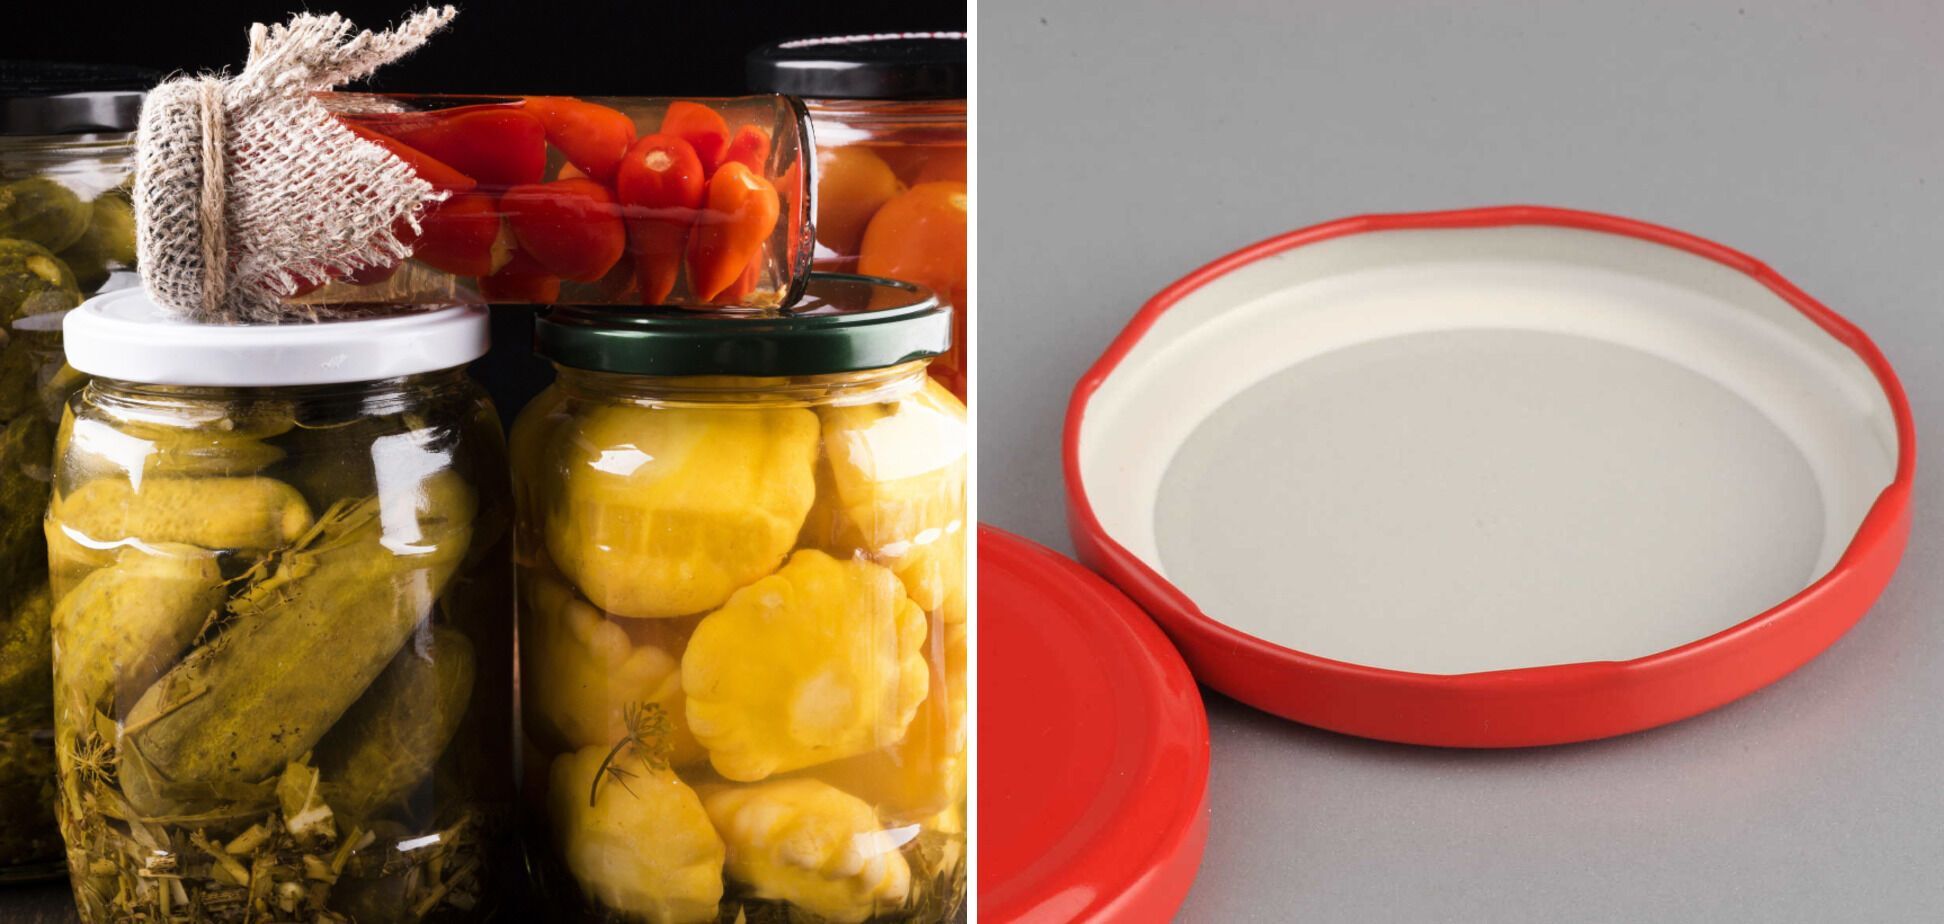 What is the difference between lacquered and unlacquered lids for canning